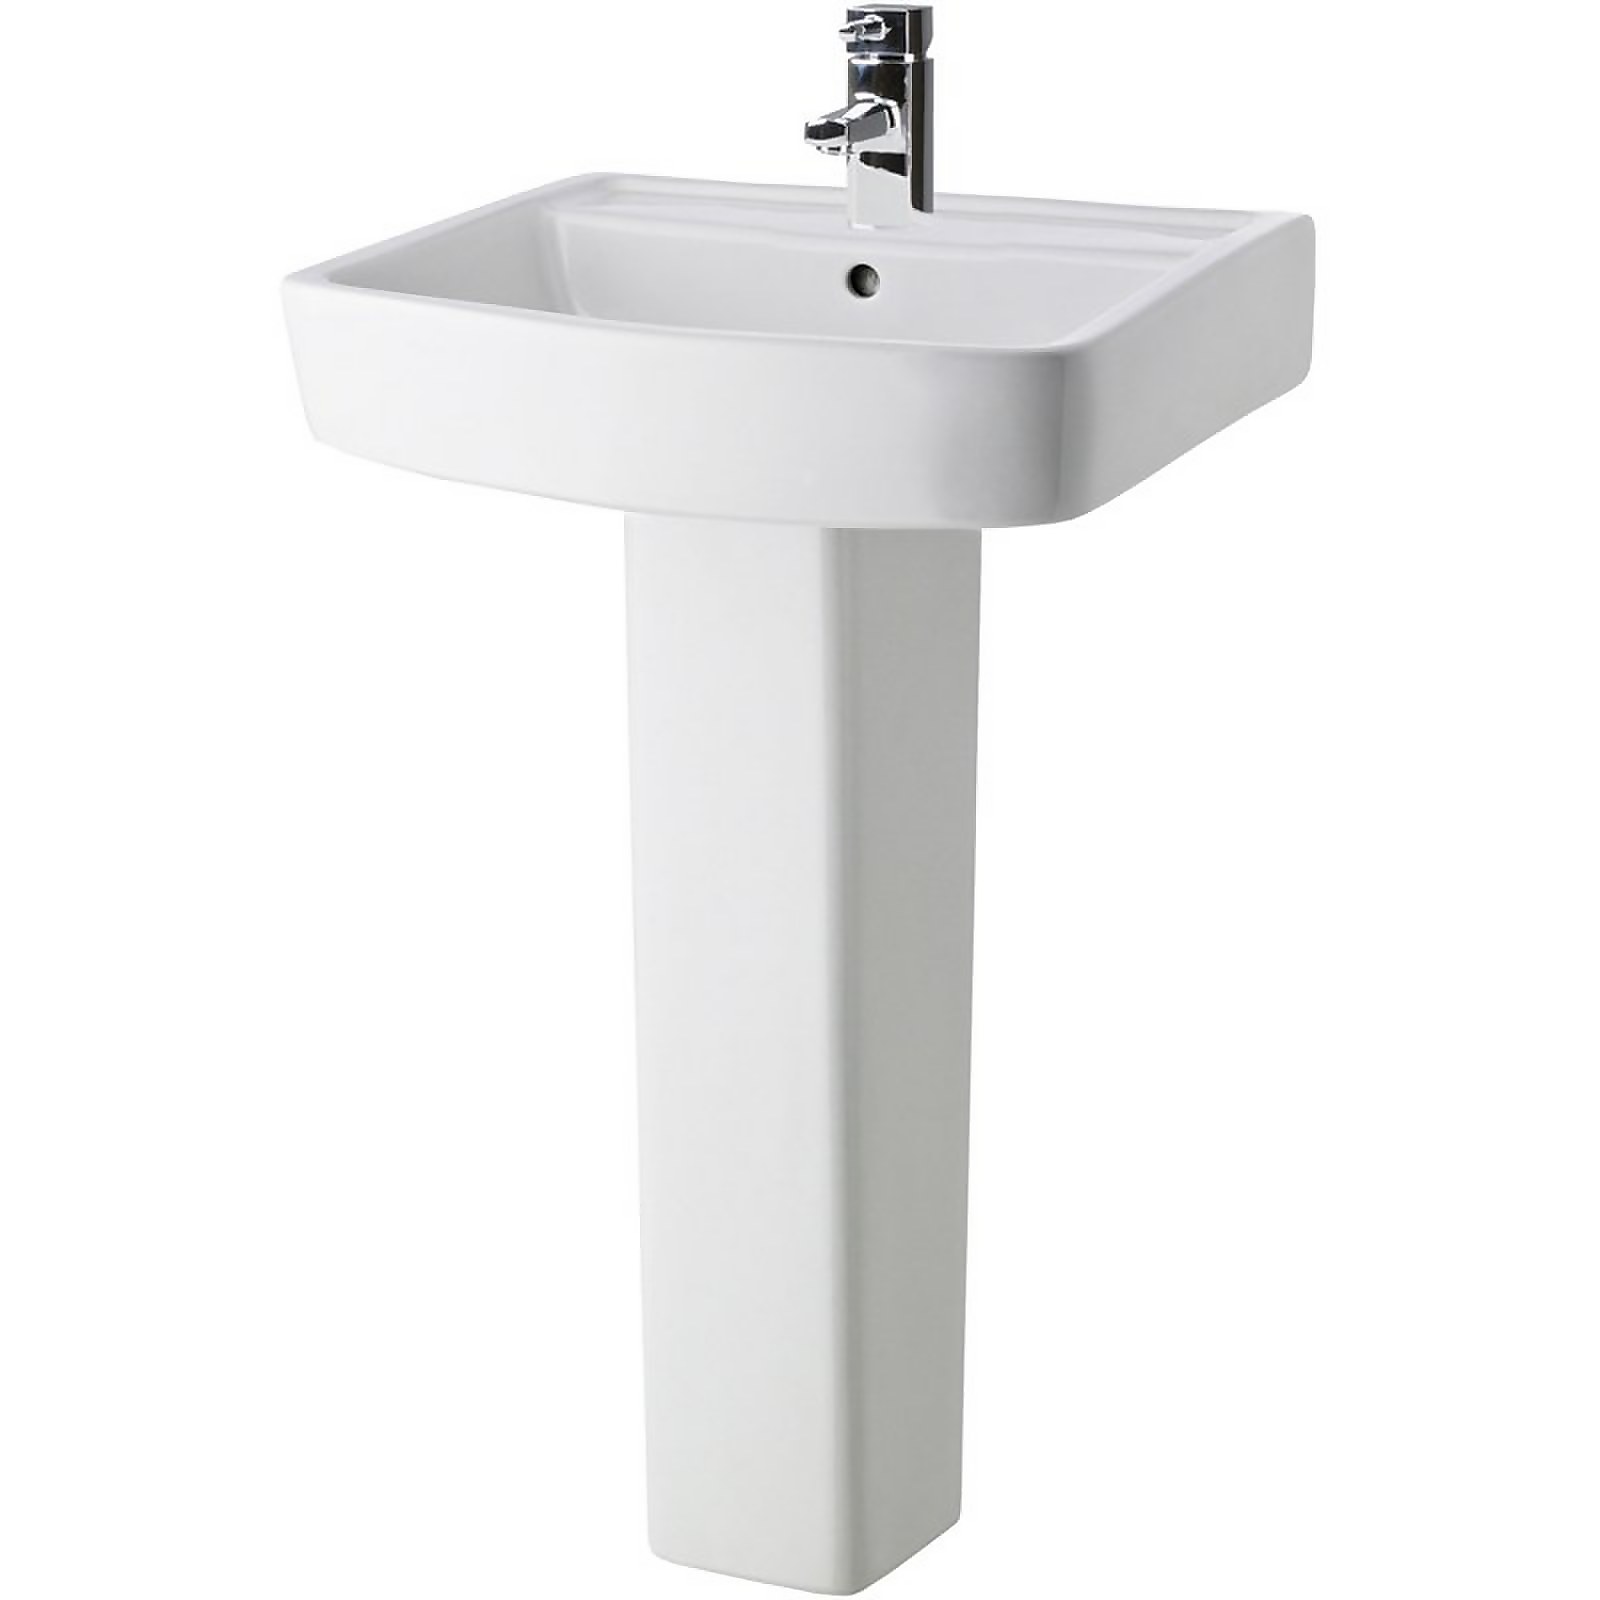 Photo of Balterley Optic 1 Tap Hole Basin And Full Pedestal - 520mm